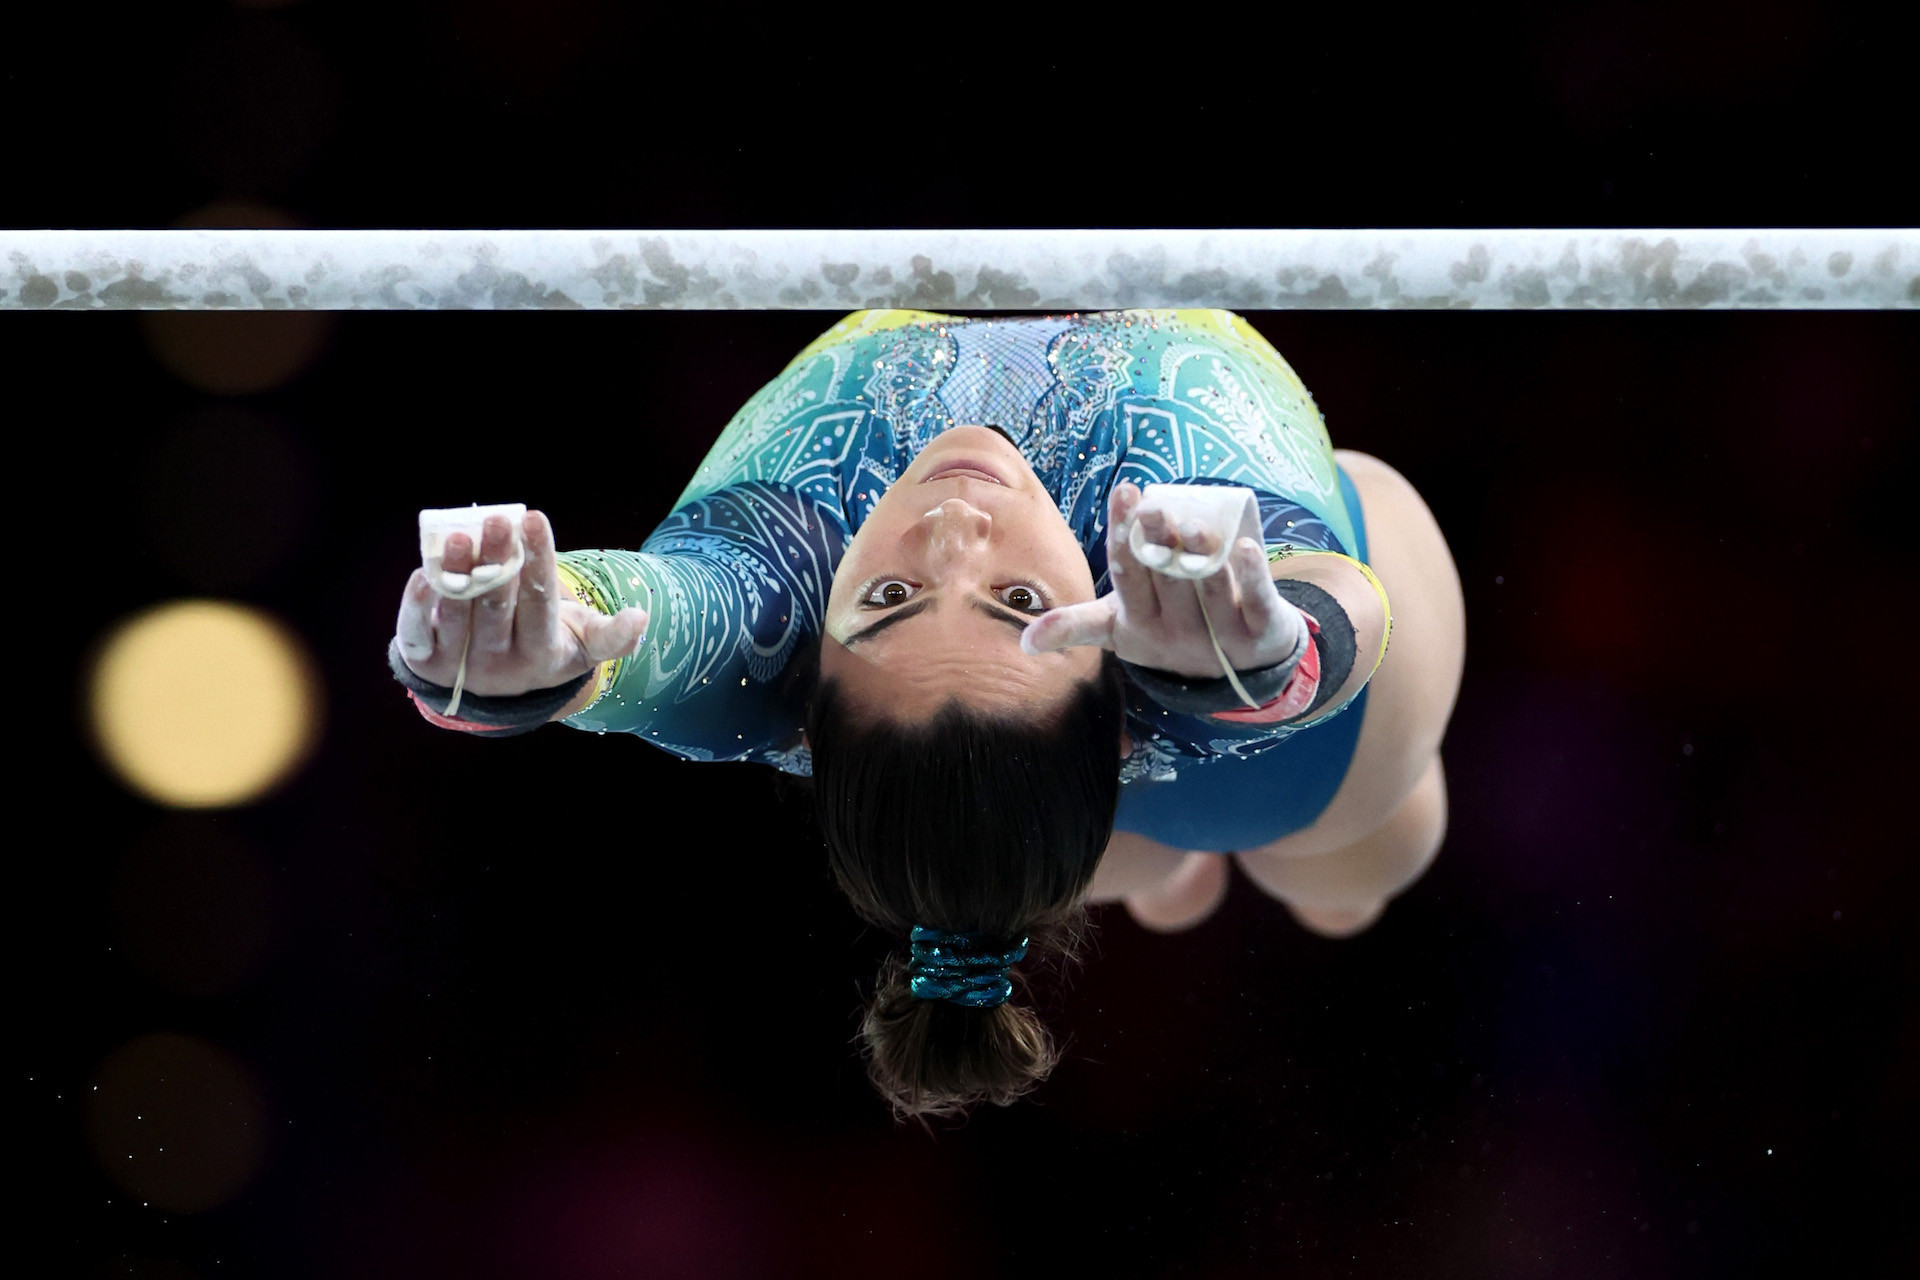 Georgia Godwin at the uneven bars in the Birmingham 2022 Commonwealth Games. GETTY IMAGES